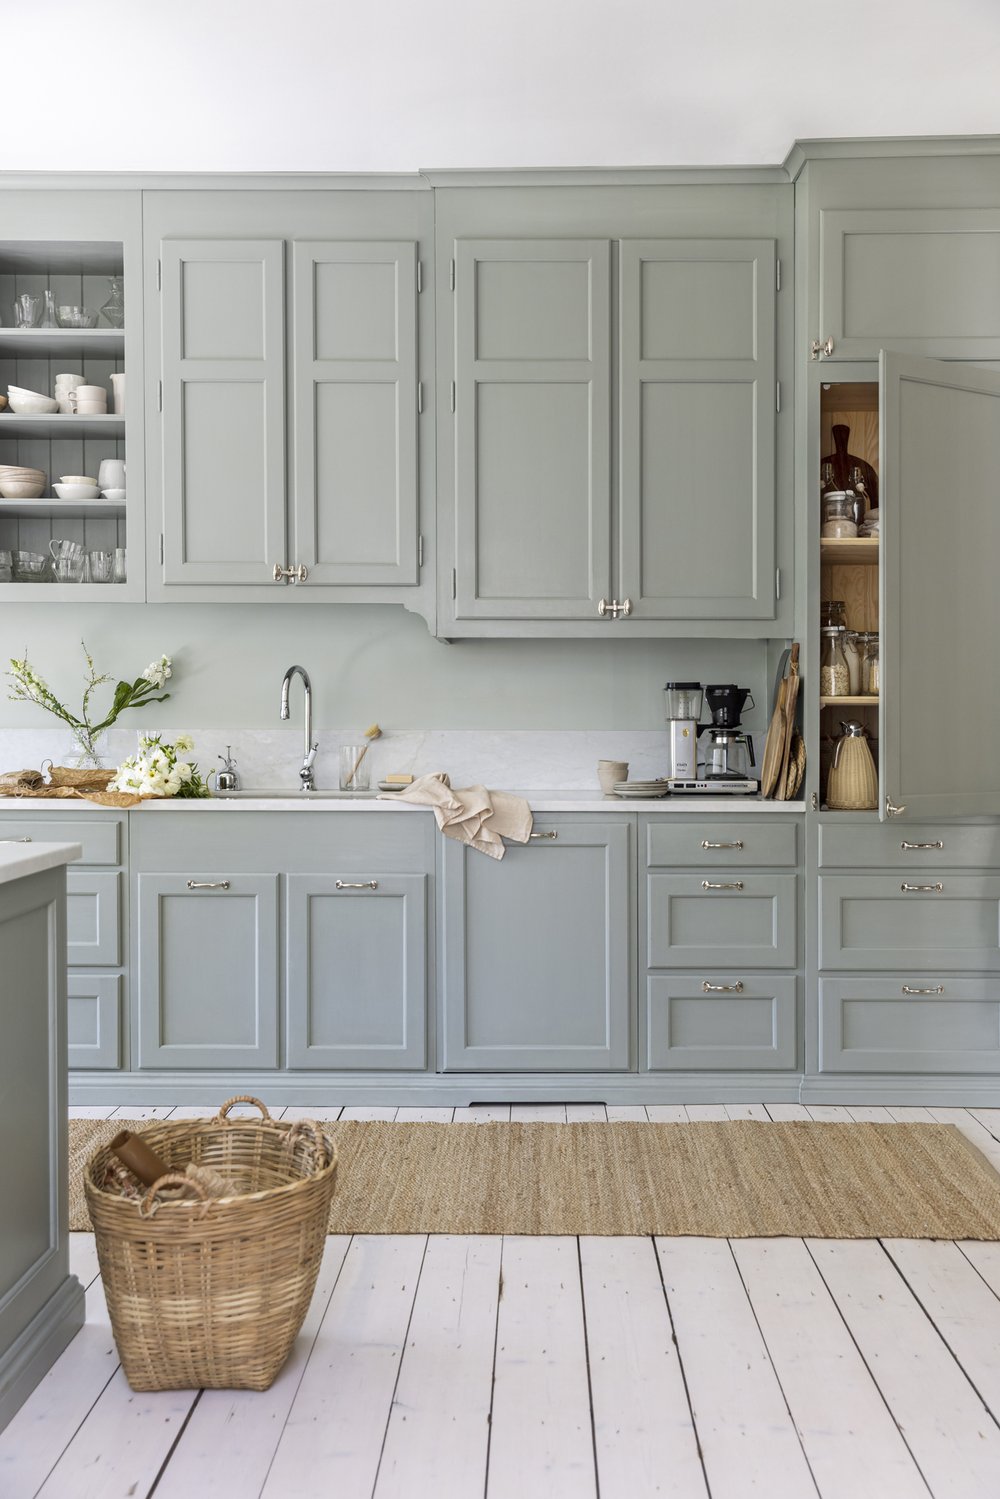 14 inspiring kitchens with sage green cabinets for a subtle fresh look -  COCO LAPINE DESIGN